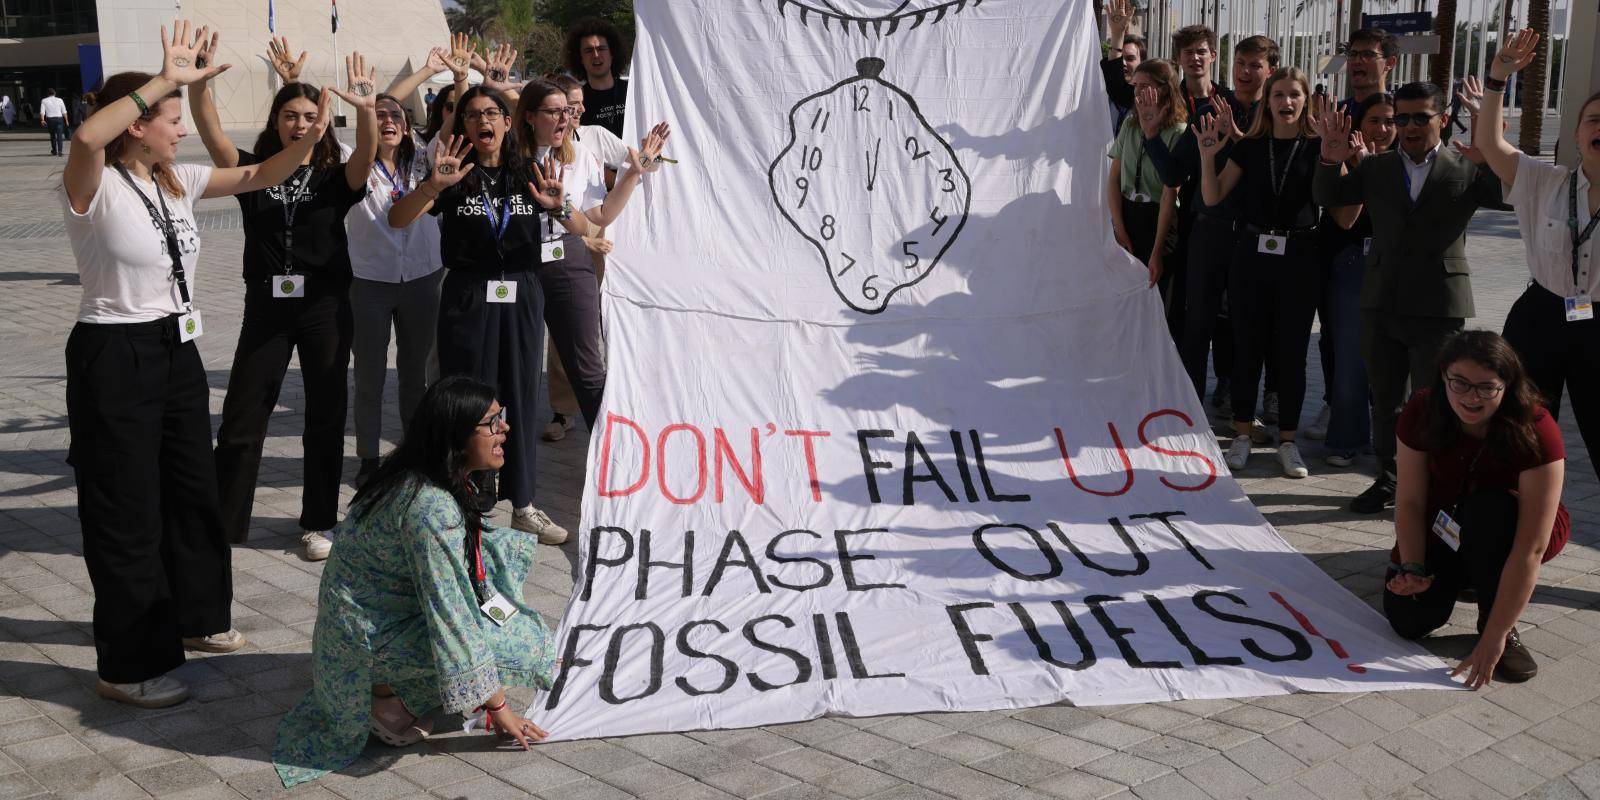 https://www.chathamhouse.org/sites/default/files/styles/12_6_media_huge/public/2023-12/2023-12-12-phase-out-down-fossil-fuels.jpg?h=4a488f34&itok=gO7YFLvb